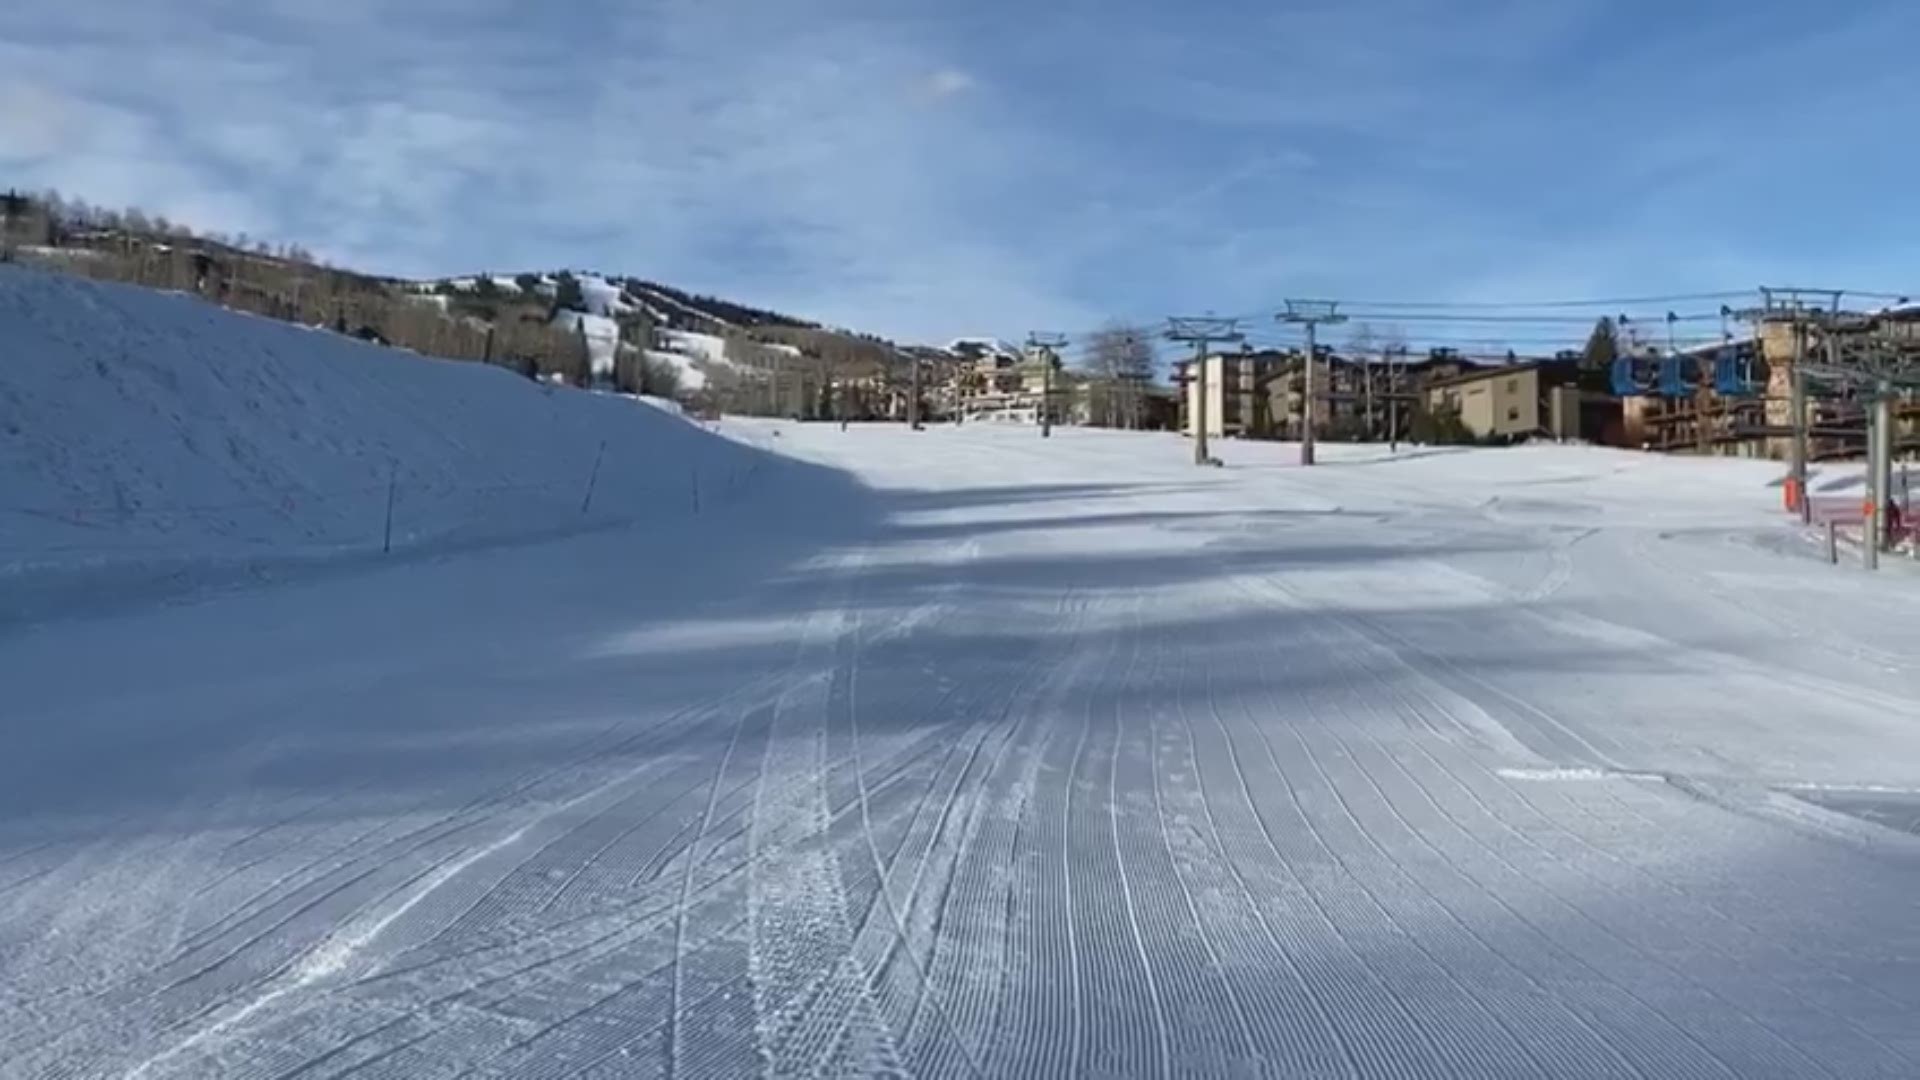 Snowmass in Aspen is eerily empty after Gov. Polis ordered all Colorado ski areas to close for one week to fight the spread of COVID-19.